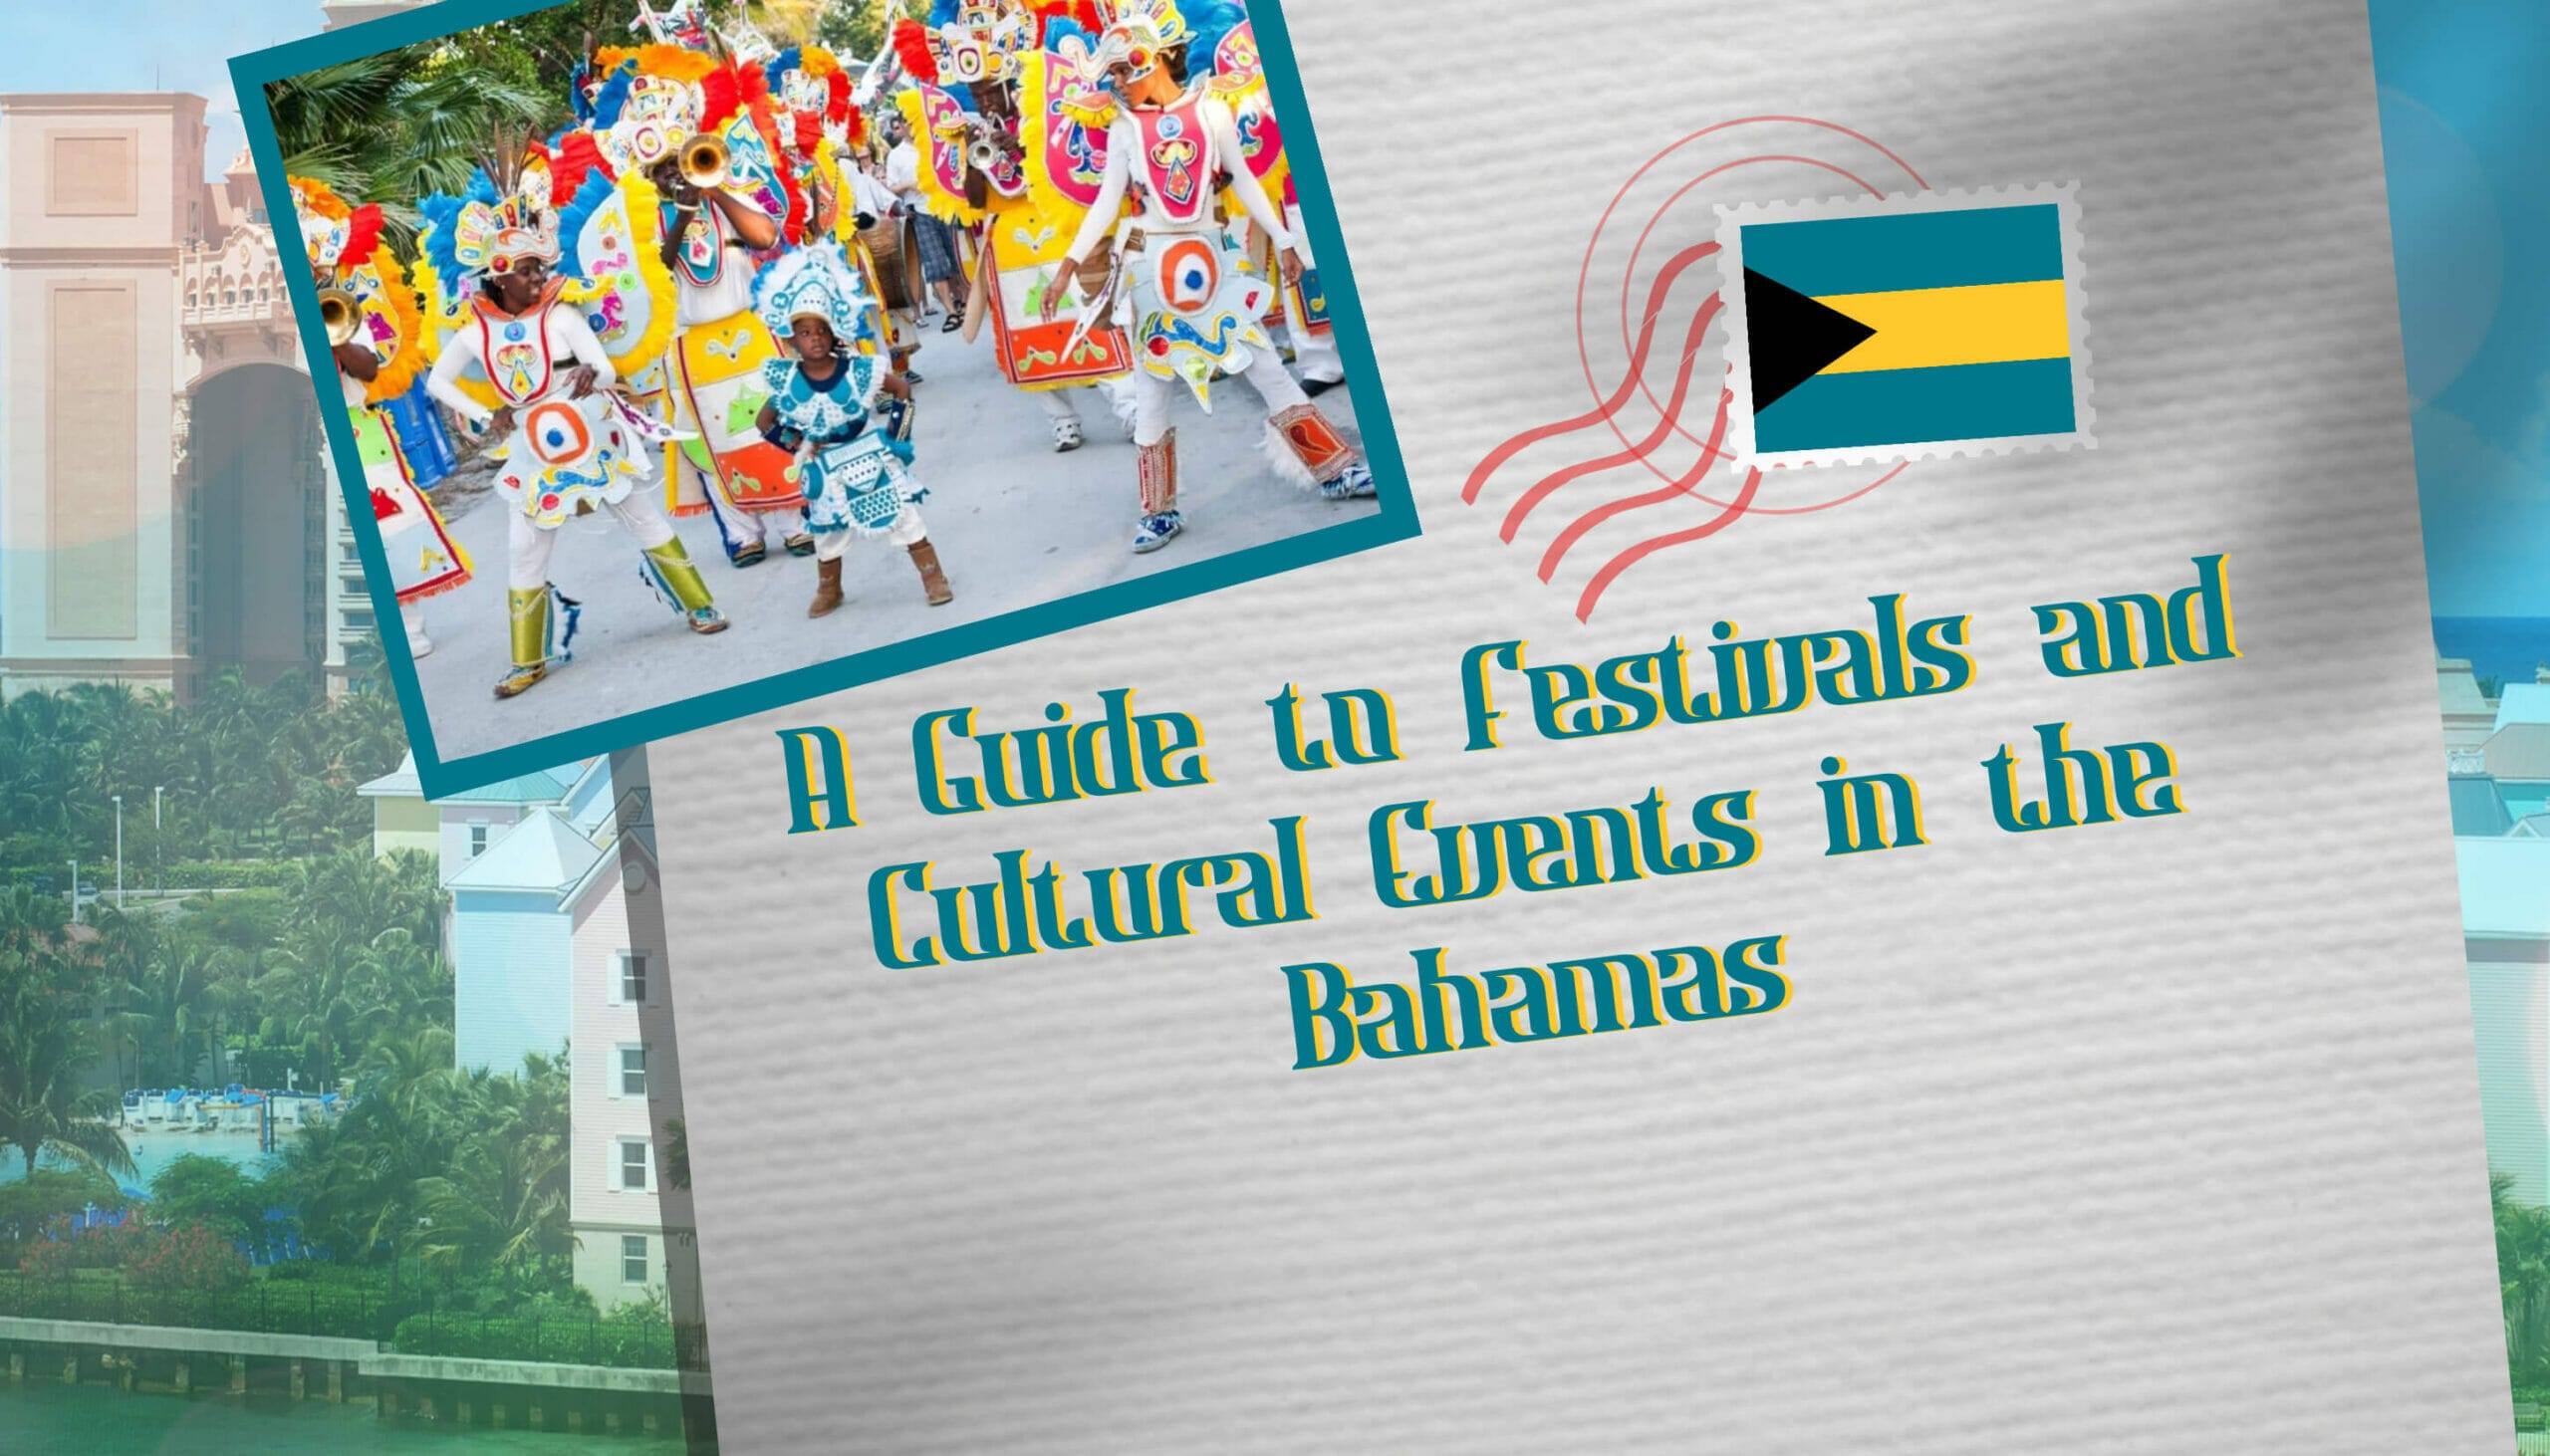 A Guide to Festivals and Cultural Events in the Bahamas